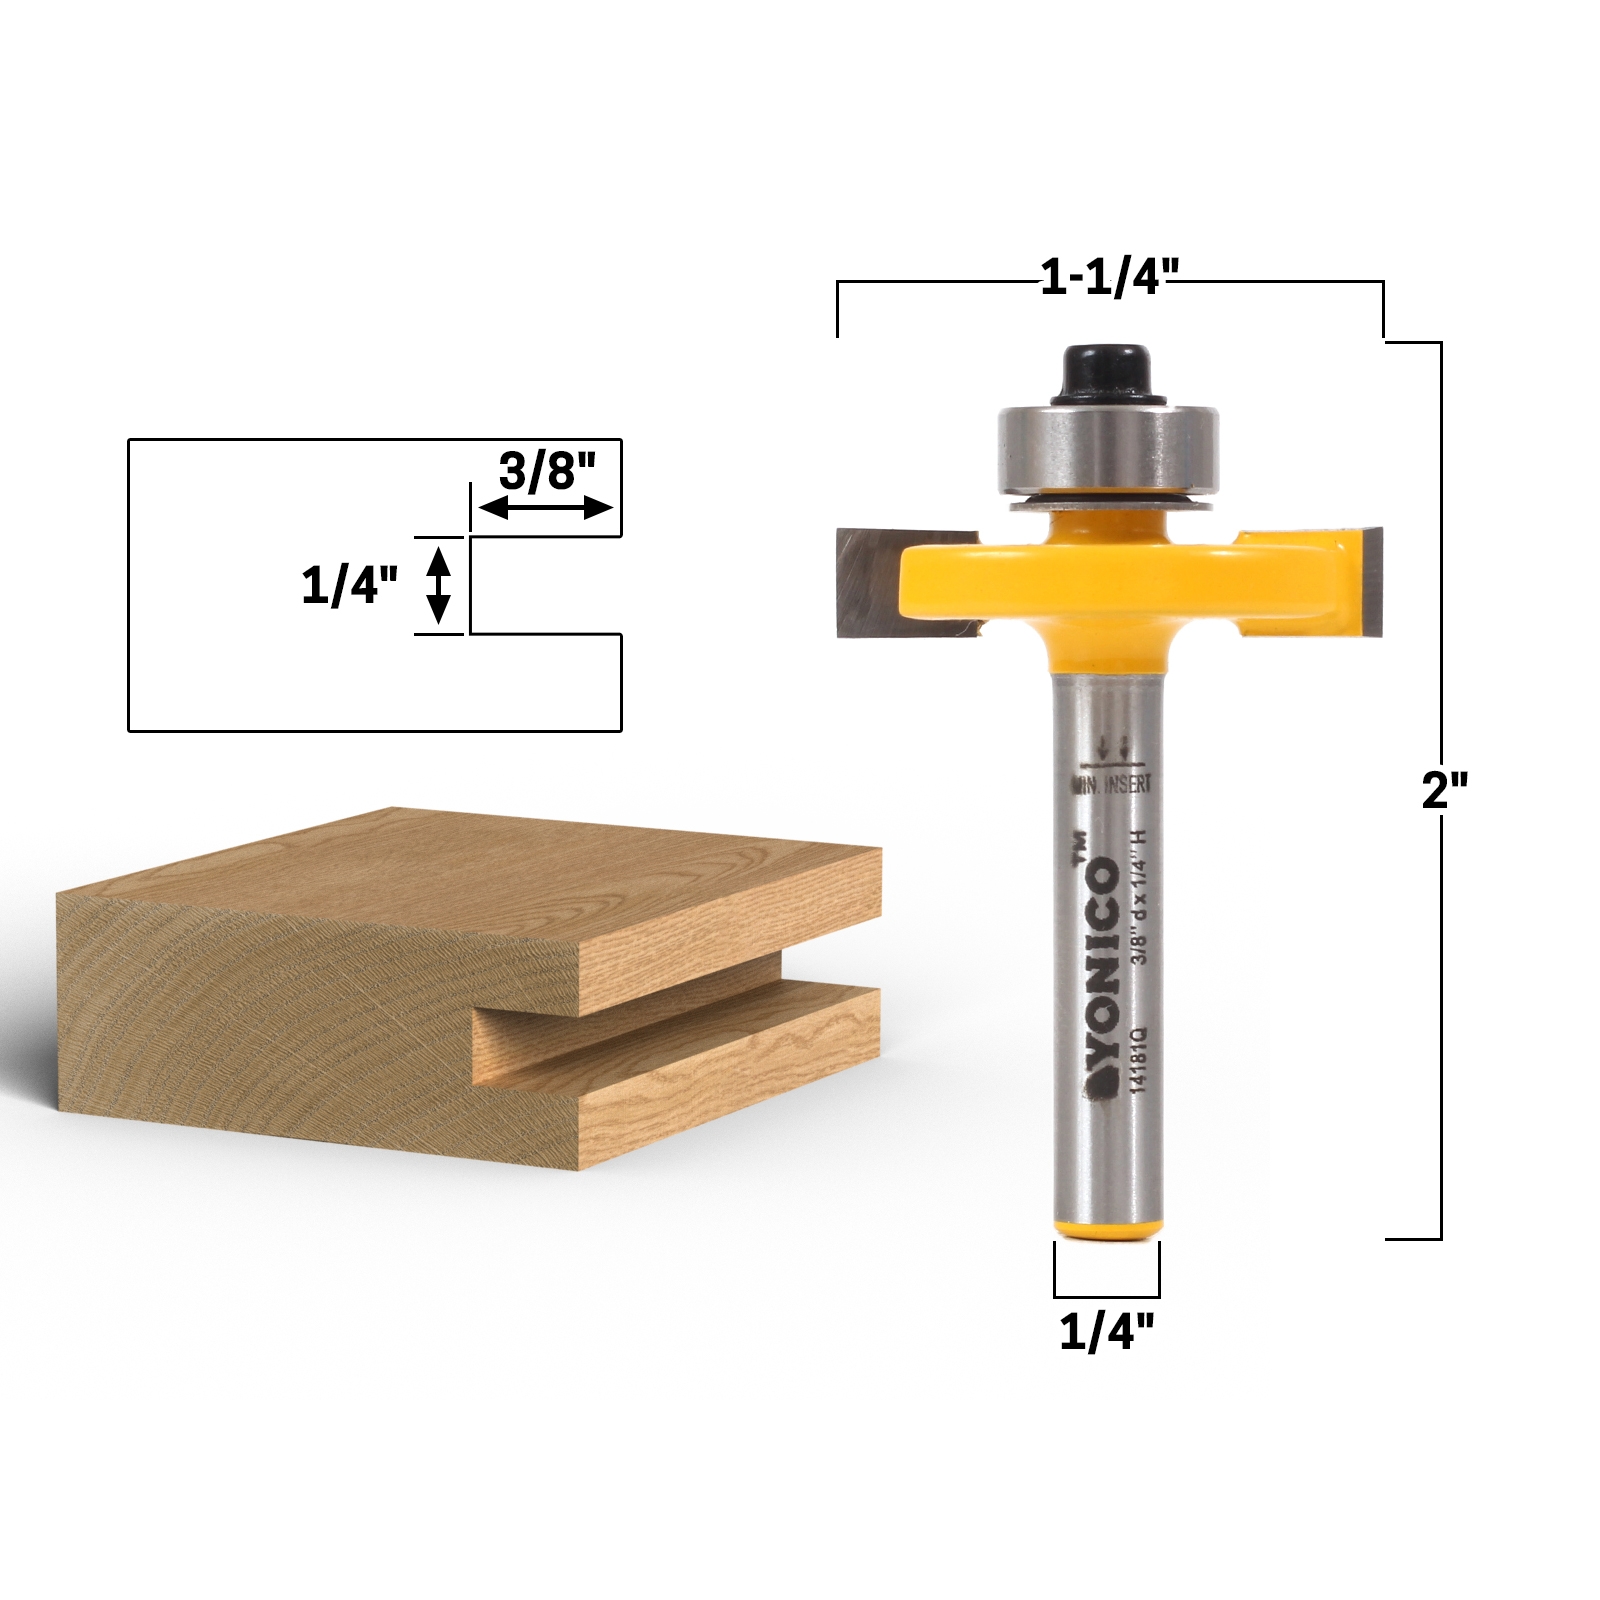 1/4" Shank 1/4" Slotting Cutter Router Bit Assembly Yonico 12107q